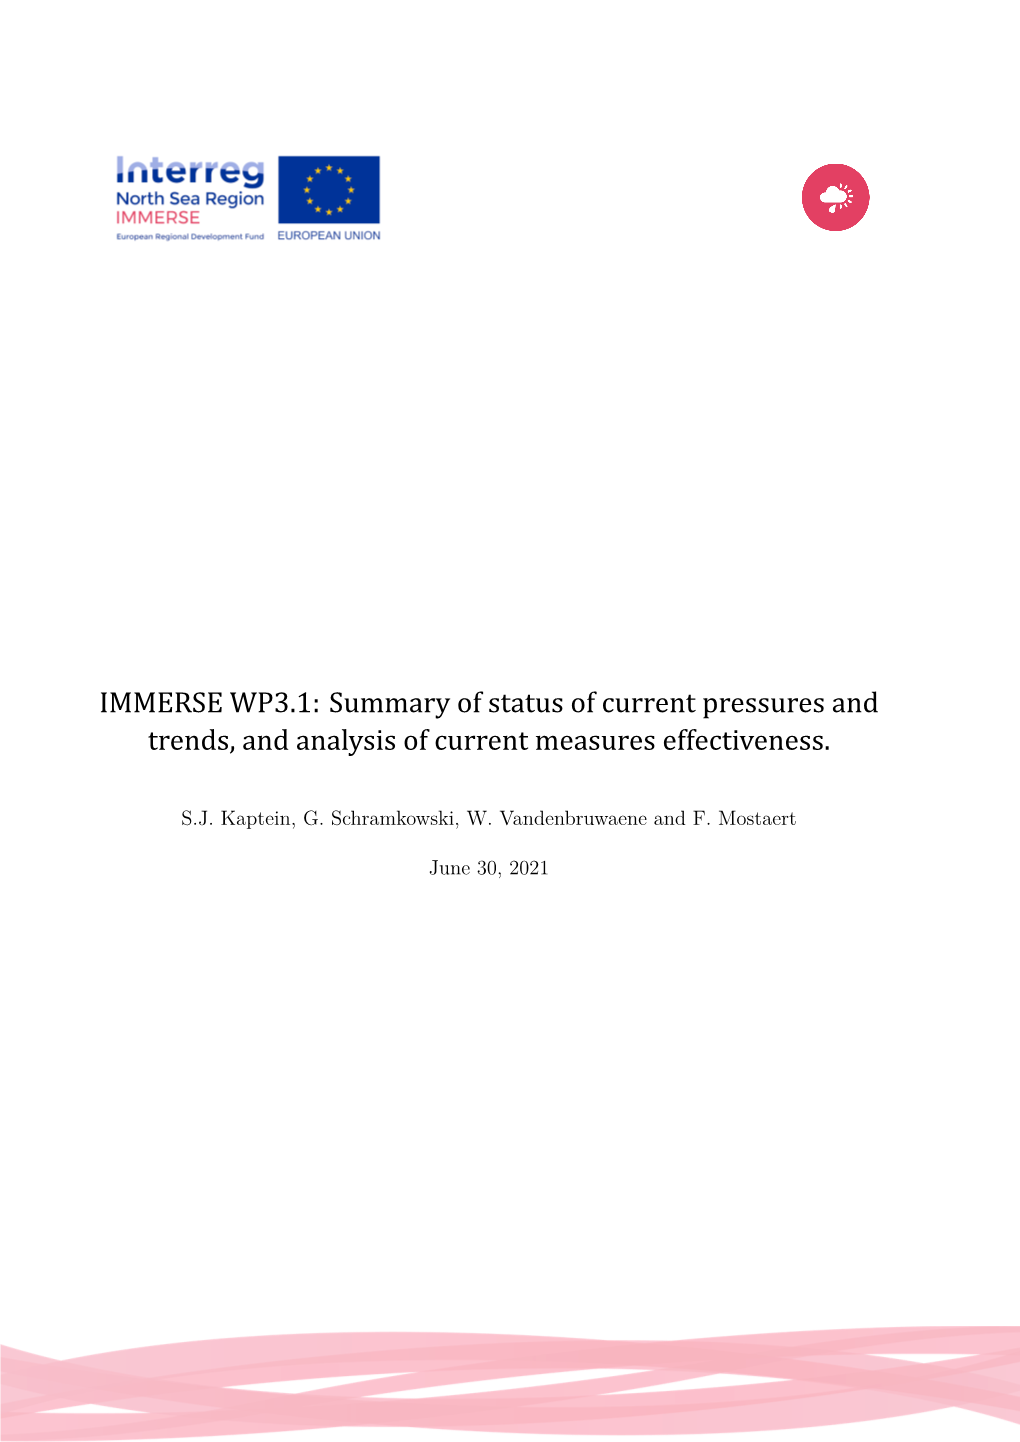 IMMERSE WP3.1: Summary of Status of Current Pressures and Trends, and Analysis of Current Measures Effectiveness